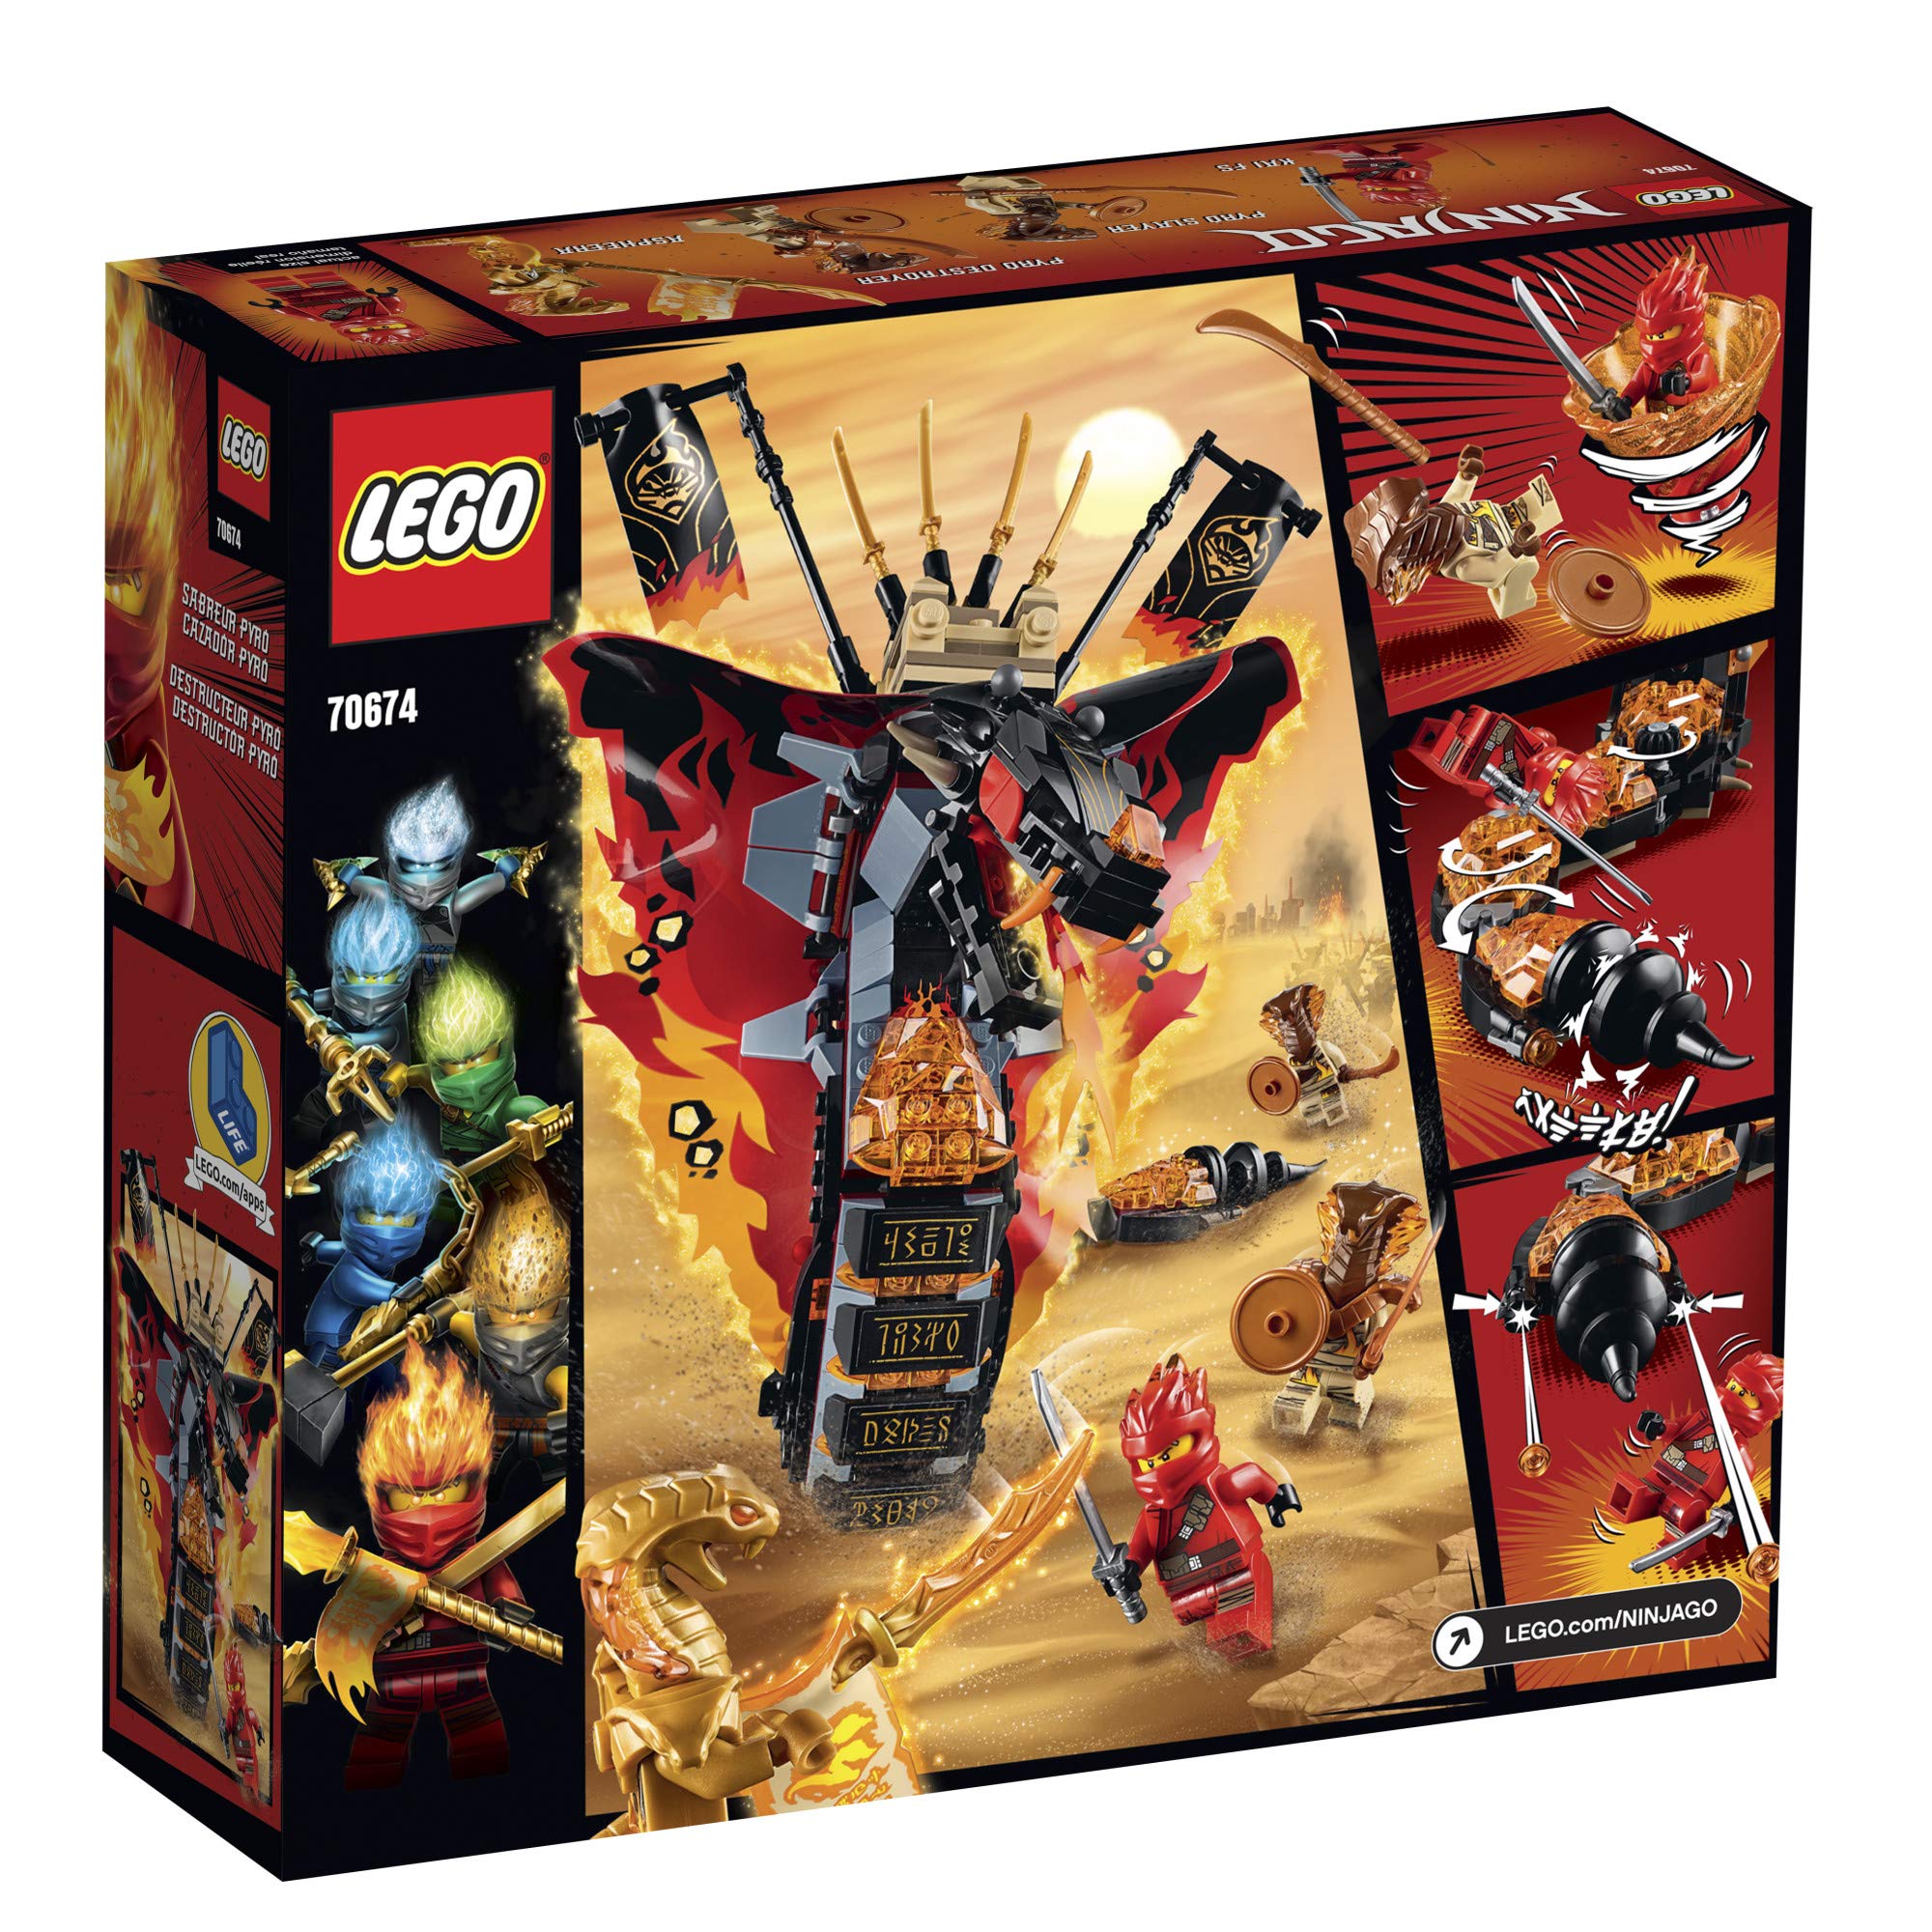 LEGO NINJAGO Fire Fang 70674 Snake Action Toy Building Set with Stud Shooters and Ninja Minifigures Characters, Perfect for Group Play (463 Pieces)